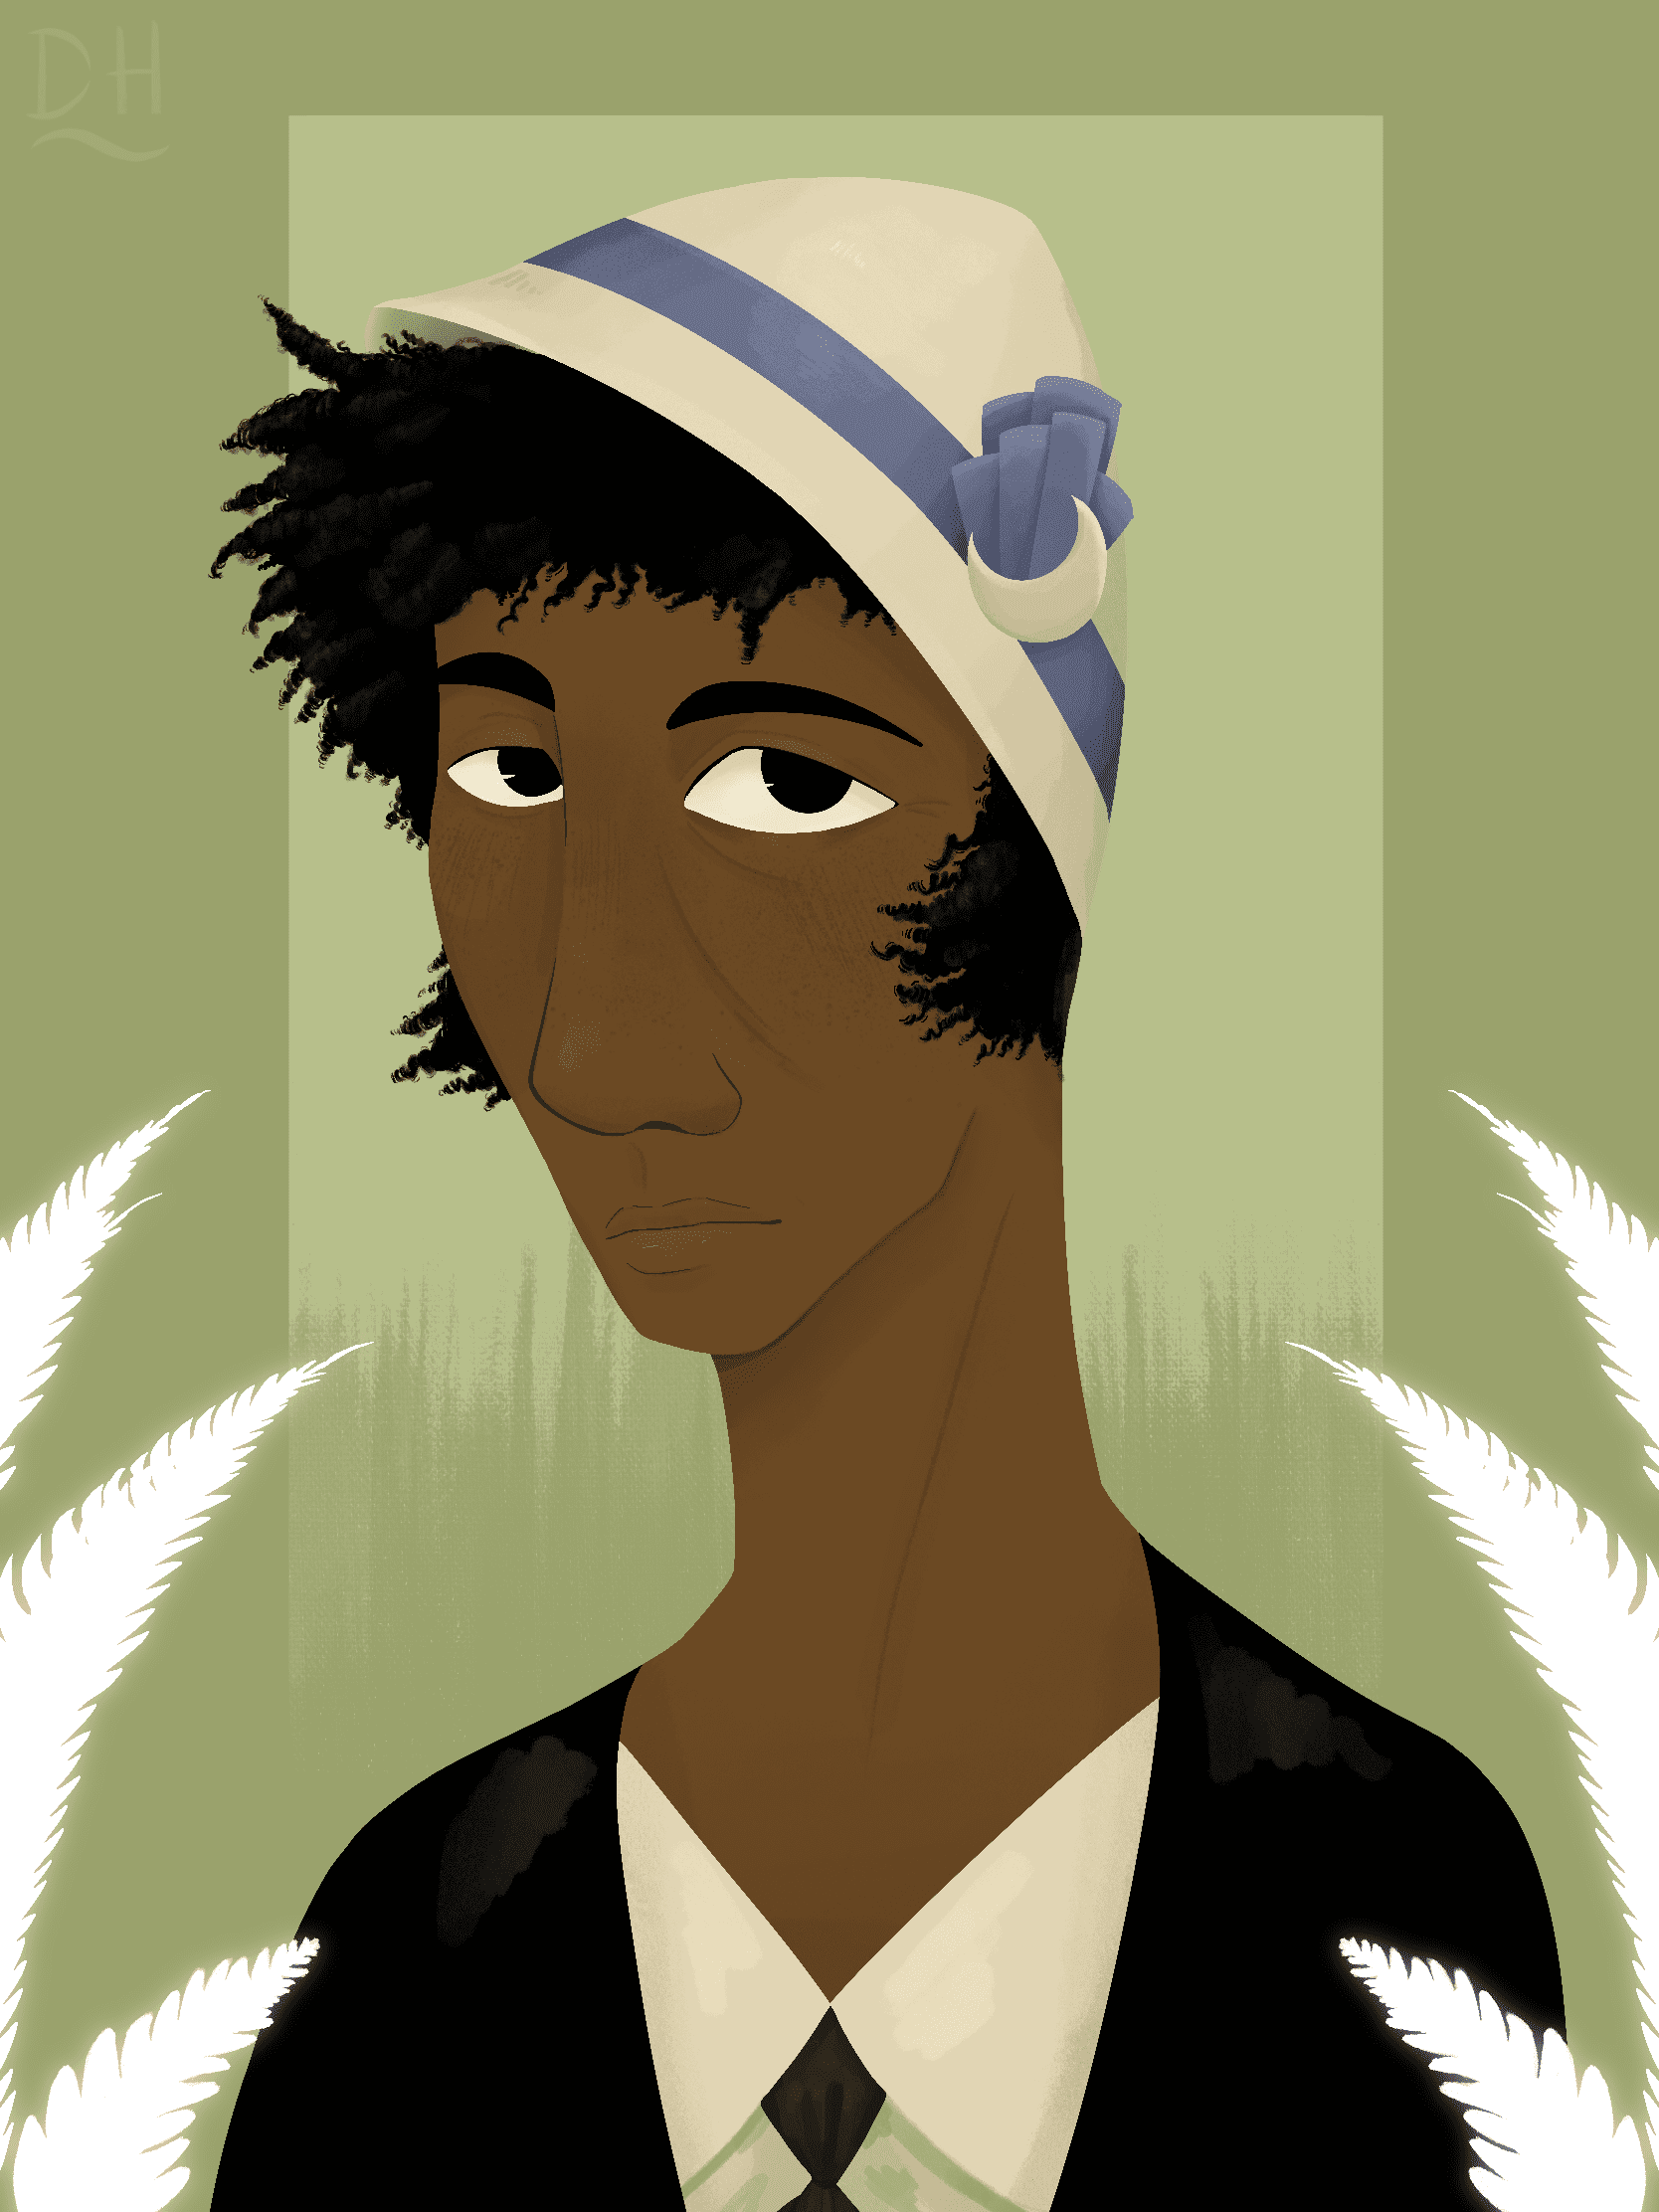 A digital bust of Florence Ledavsuk. She's a tired looking Black woman with her short hair under a white cloche hat with a lavender sash. Her shoulders are wrapped in a dark shawl. The background is pale green and framing the sides are glowing white fronds, similar to fern leaves, remniscient of her blood.